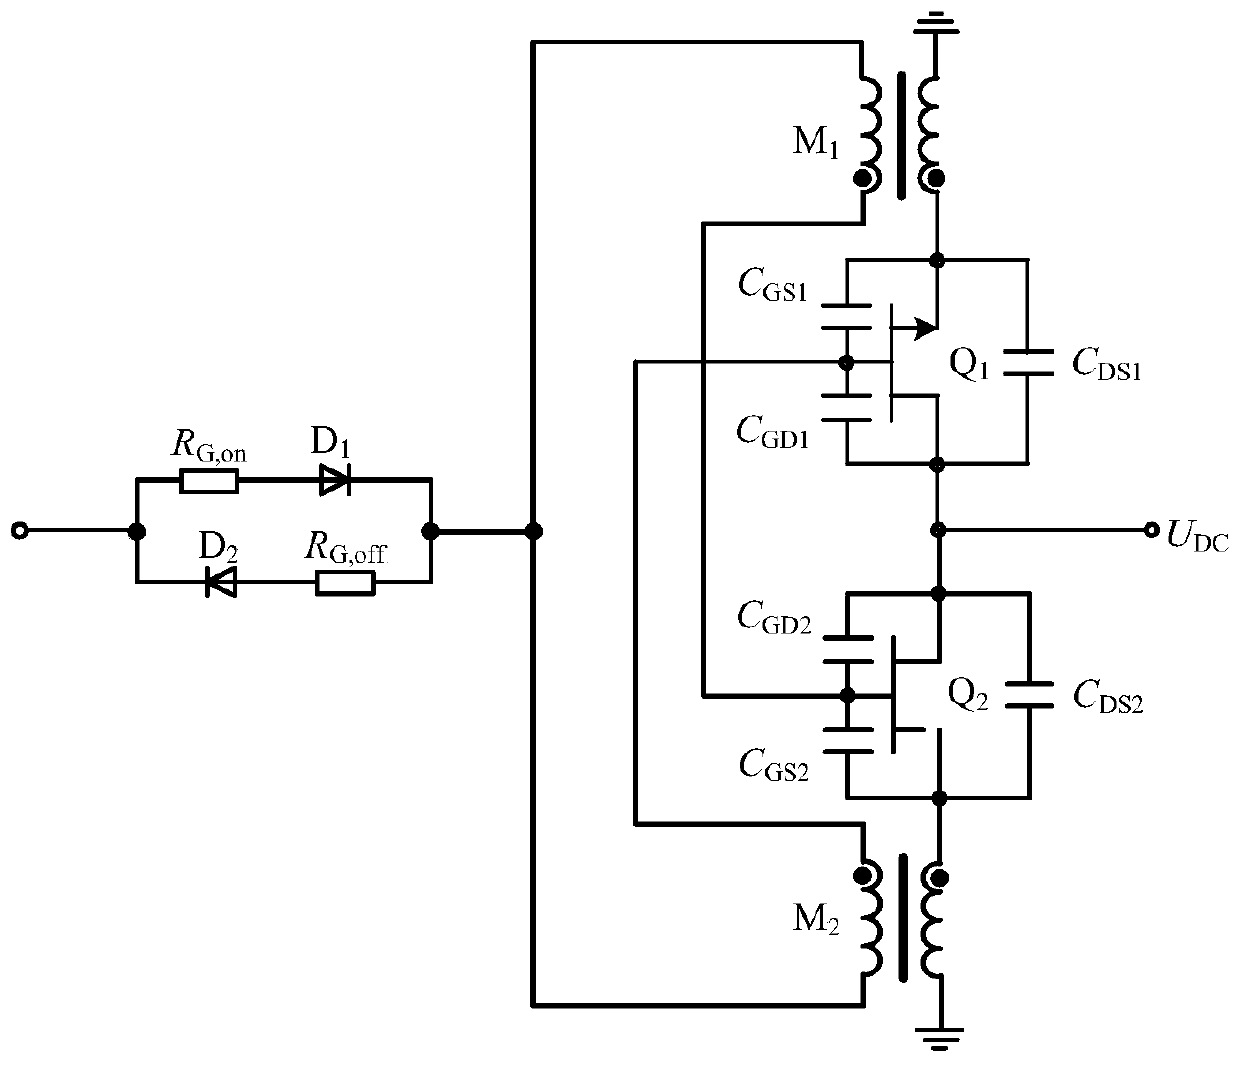 Coupled inductor gate drive circuit for realizing parallel dynamic current sharing of eGaN HEMT